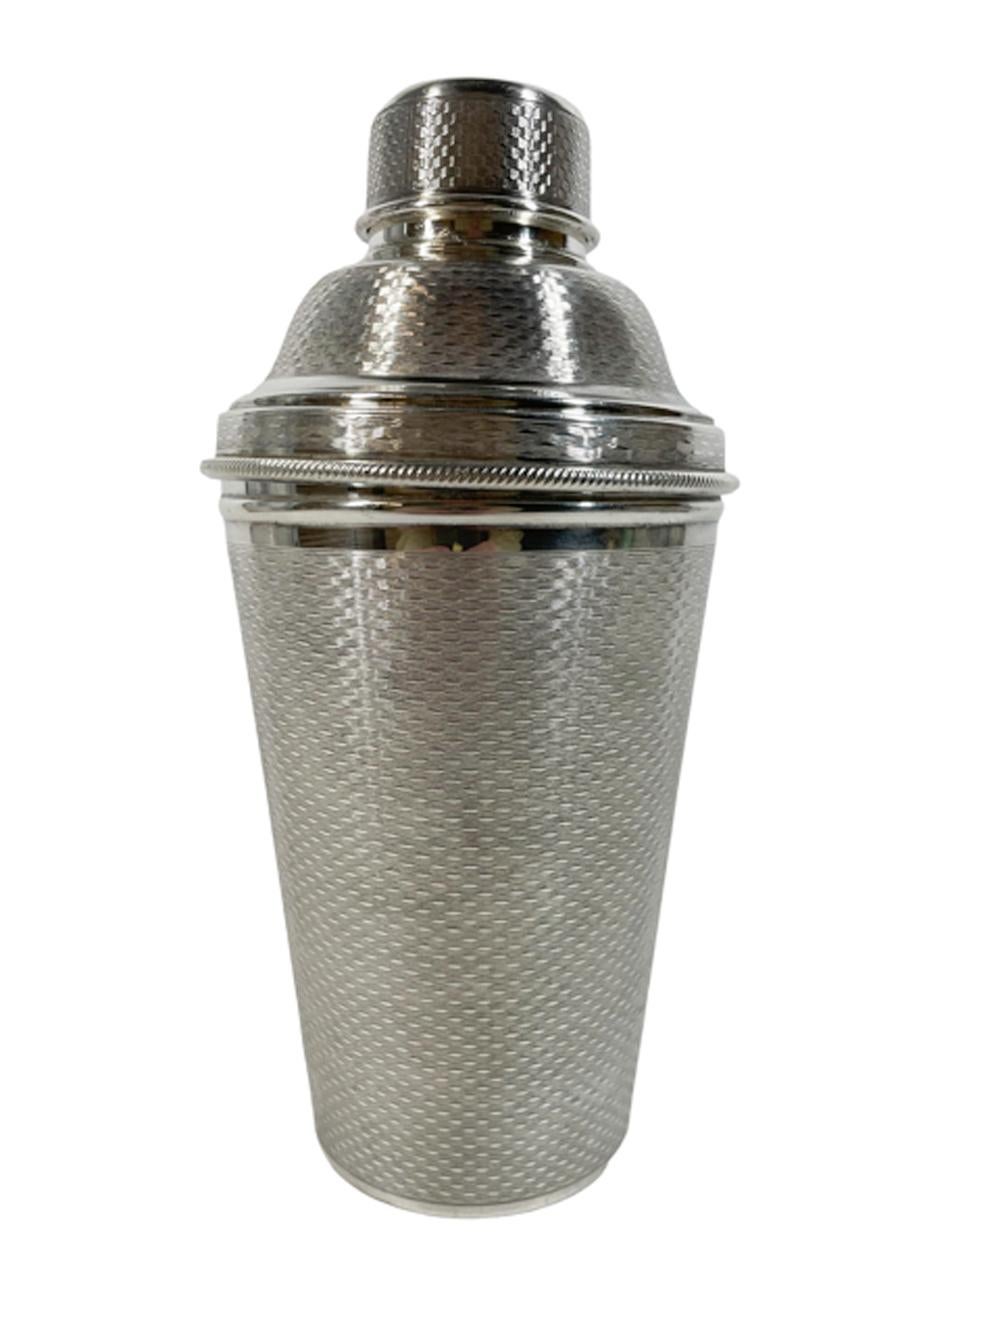 English Art Deco silver plate cobbler type cocktail shaker with allover engine turned decoration, the lid with an integral strainer and removable citrus reamer. Marked on the bottom 